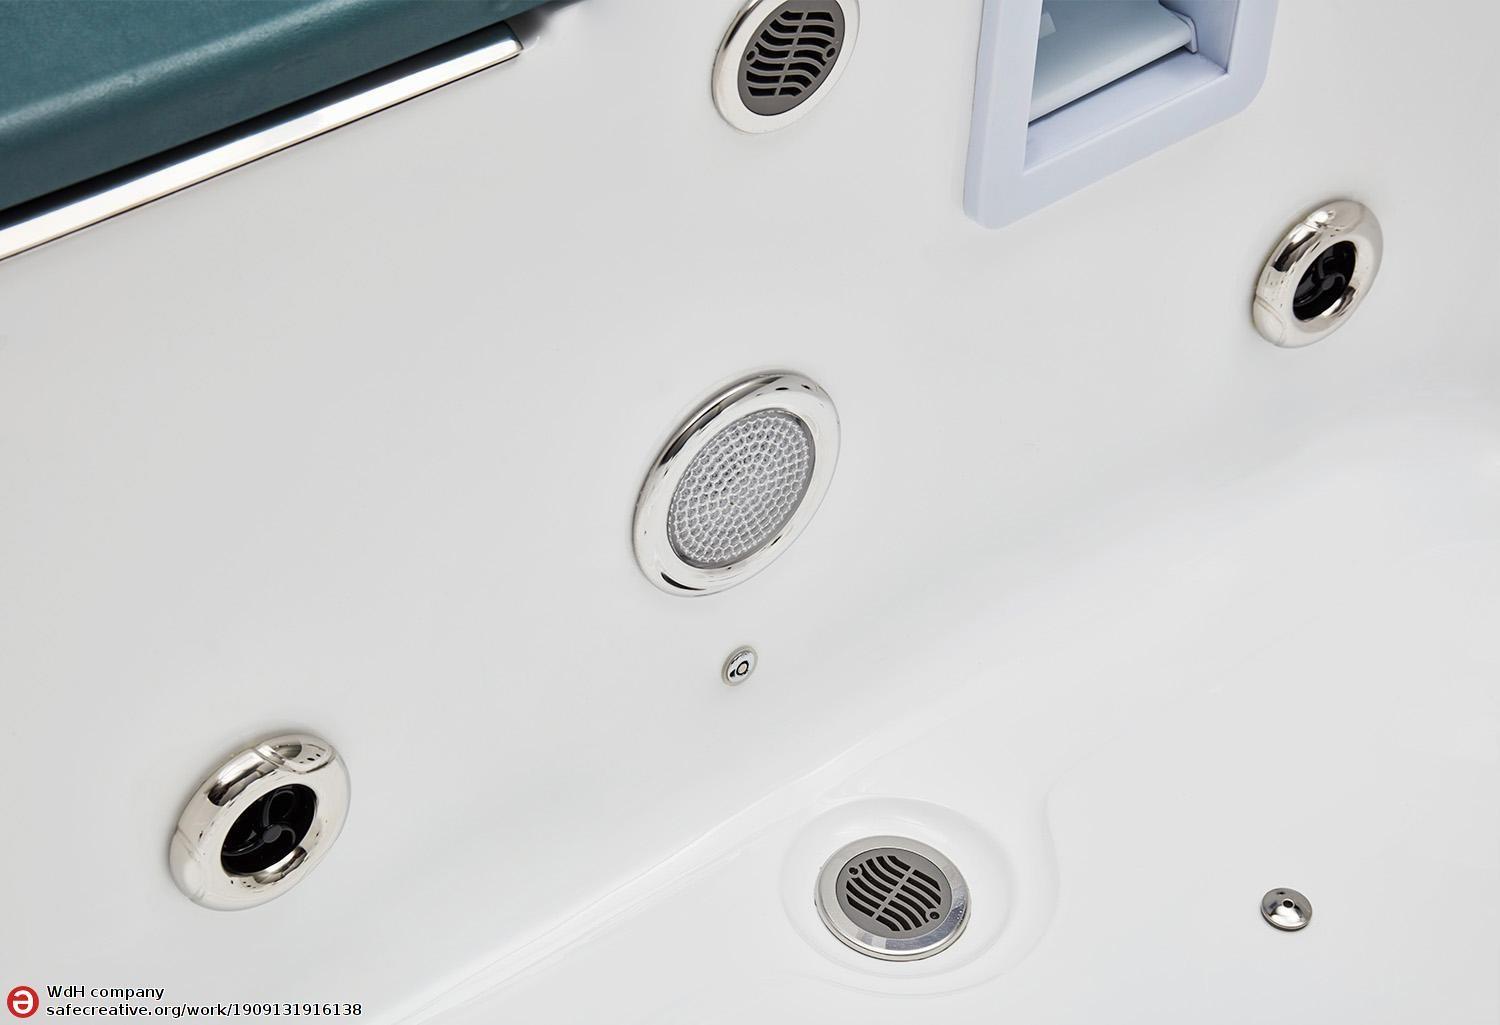 Spa jacuzzi exterior AW-0031A low cost